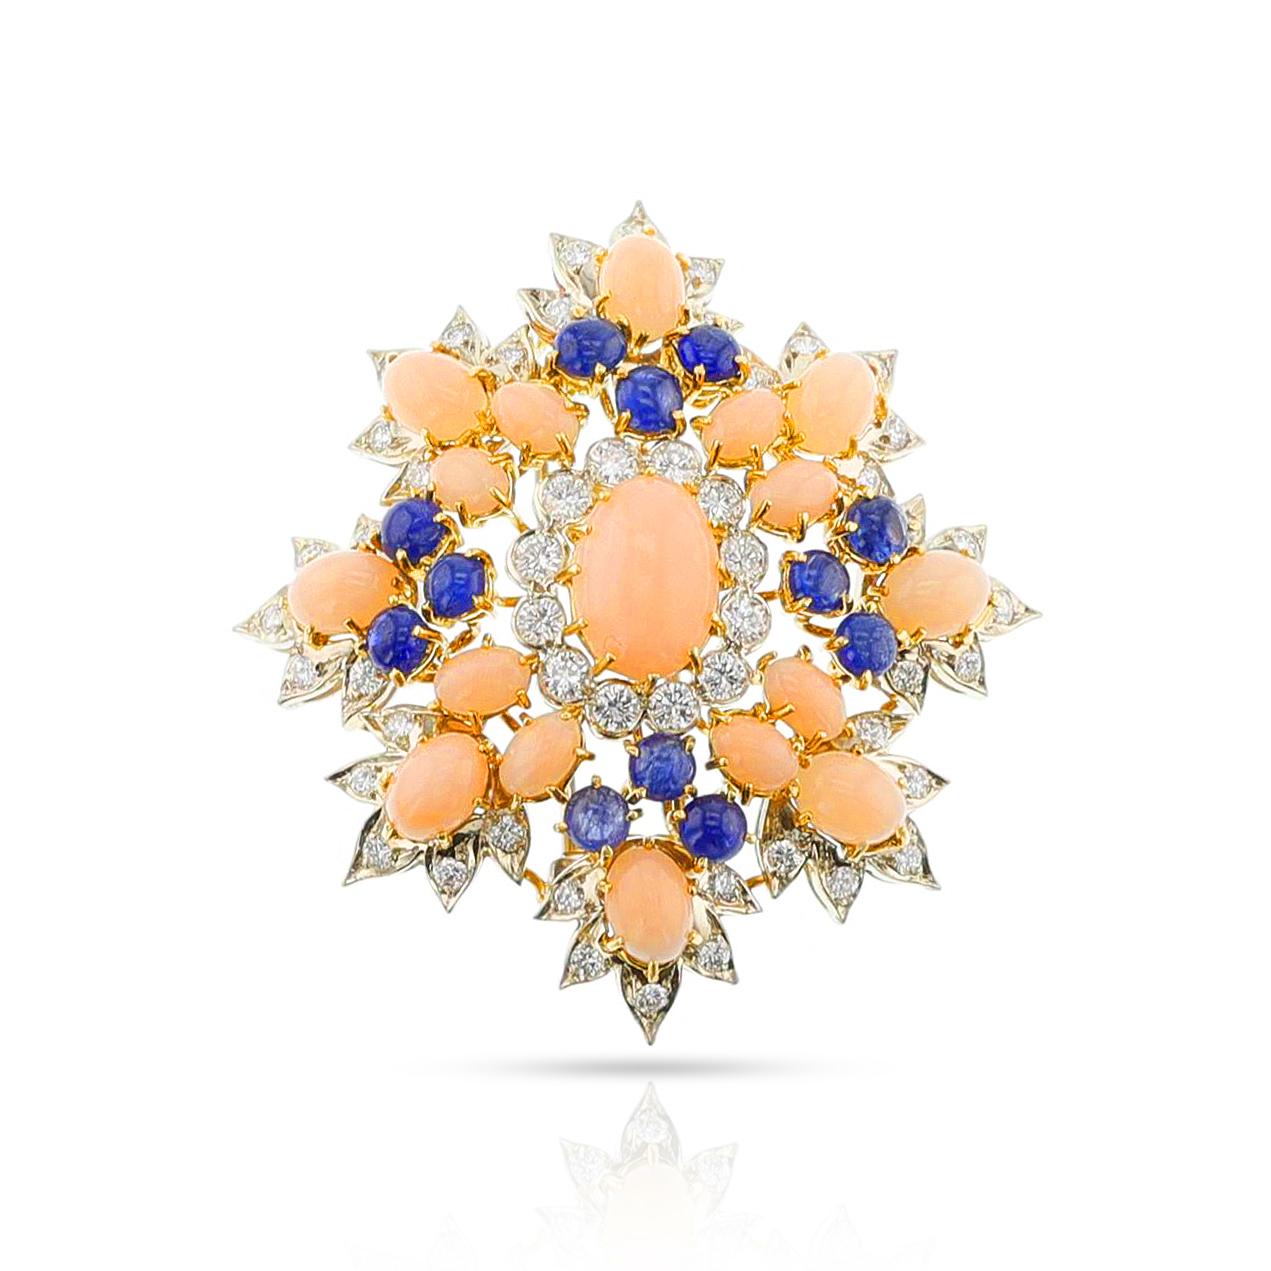 A gorgeous David Webb Coral, Sapphire and Diamond Brooch crafted from Gold & Platinum. This timeless statement piece displays stunning craftsmanship and attention to detail that will last through generations. The total weight is 30.40